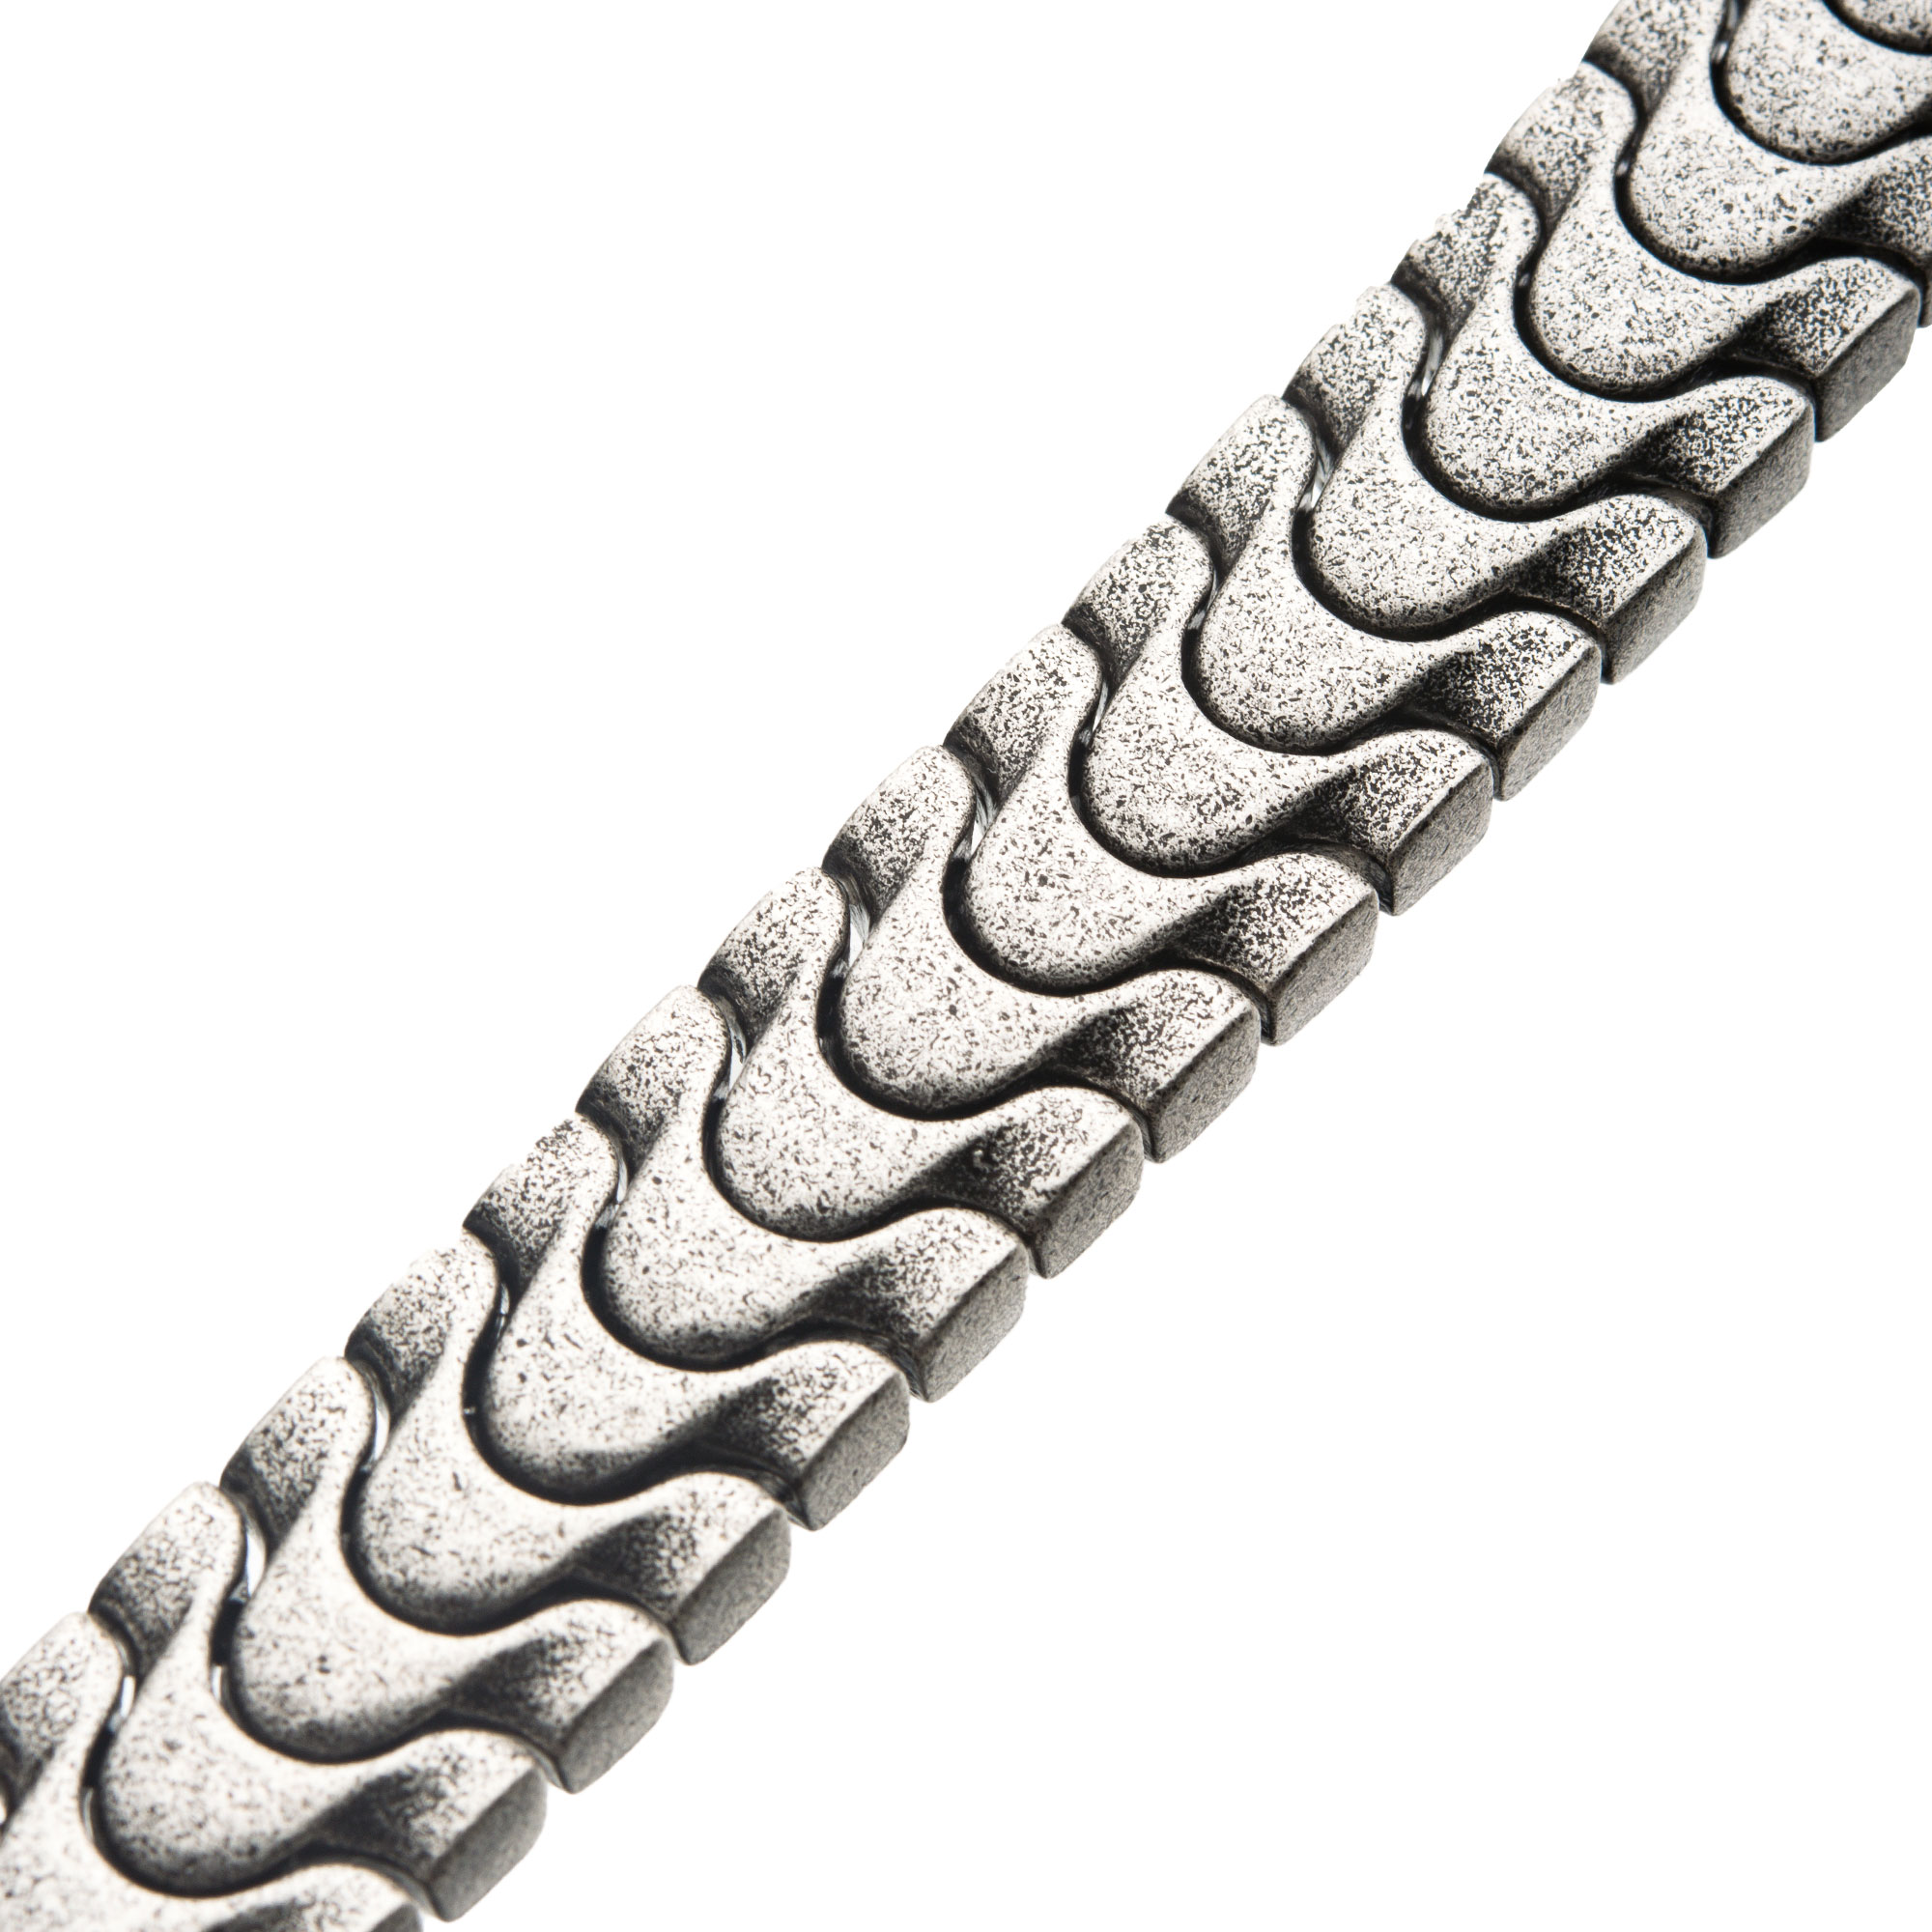 Antiqued Stainless Steel Armor Link Bracelet Image 2 Lewis Jewelers, Inc. Ansonia, CT